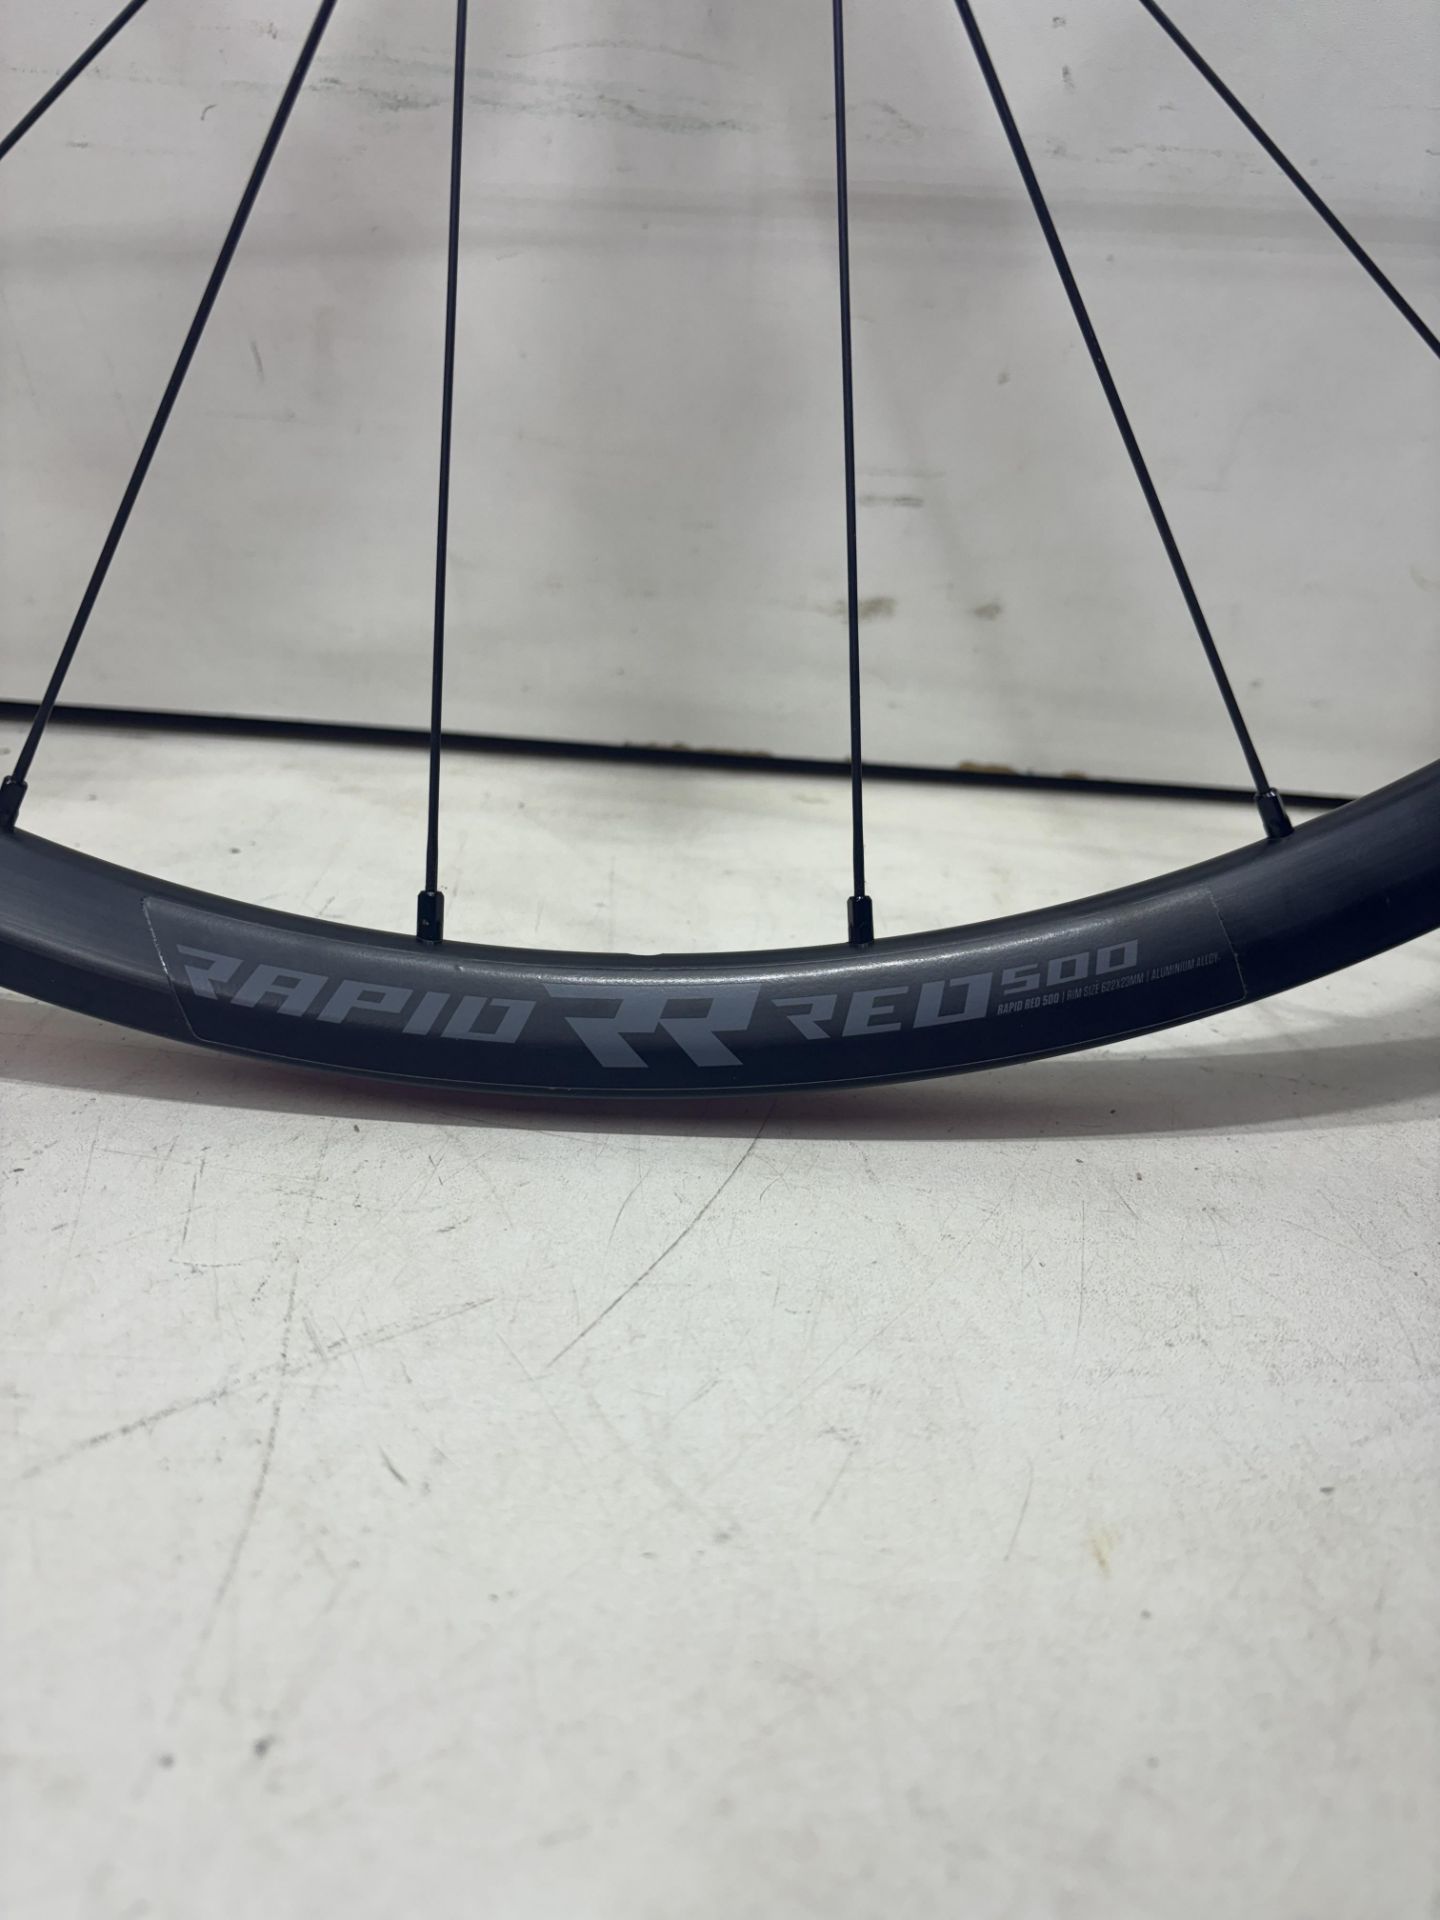 Fulcrum Rapid Red 500 Wheelset - Image 5 of 16